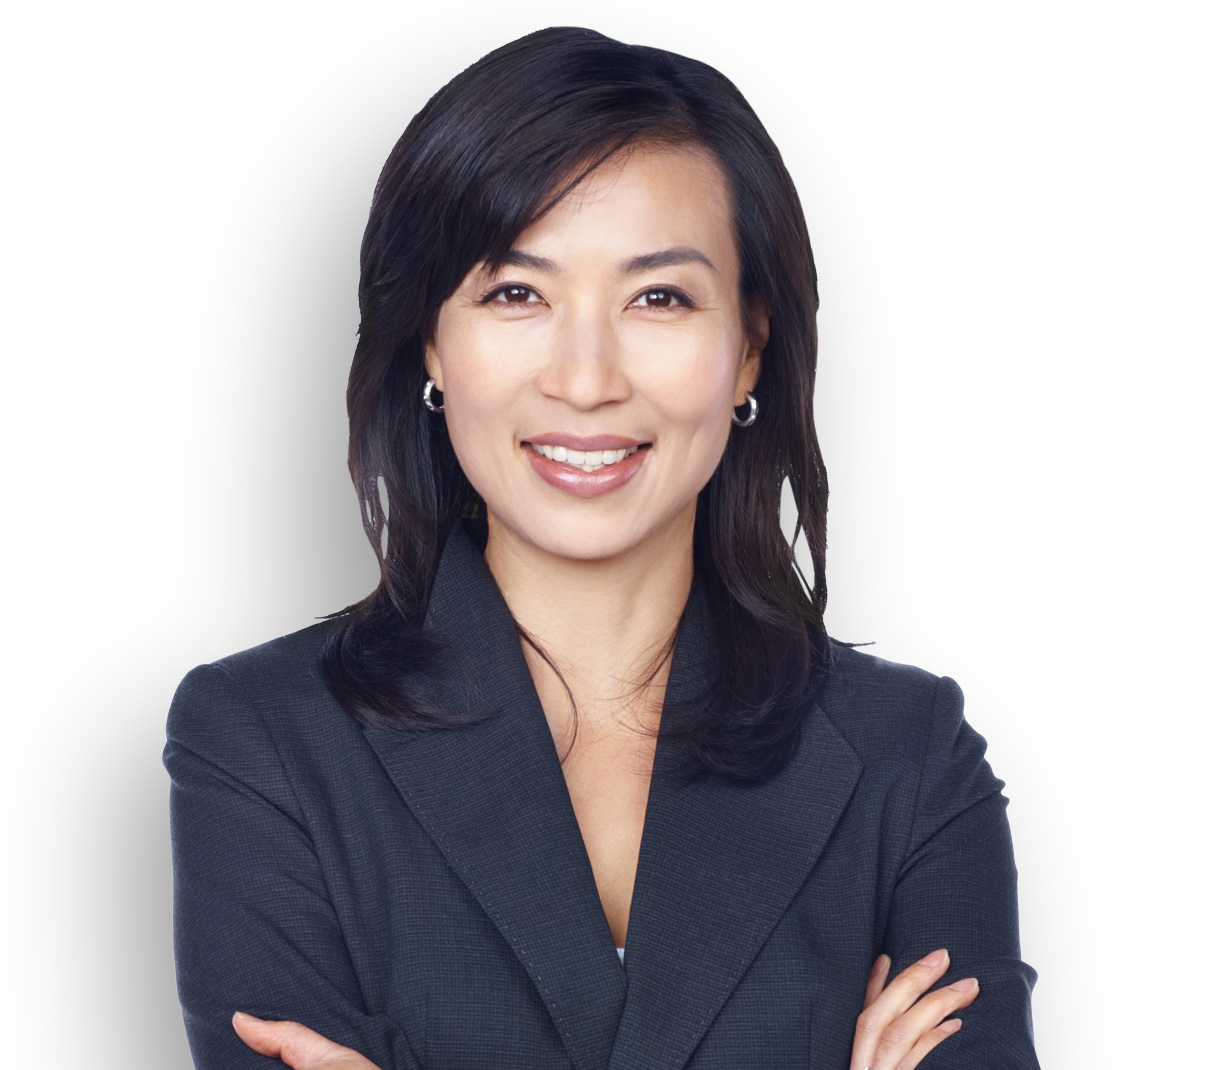 Asian woman smiling with arms folded